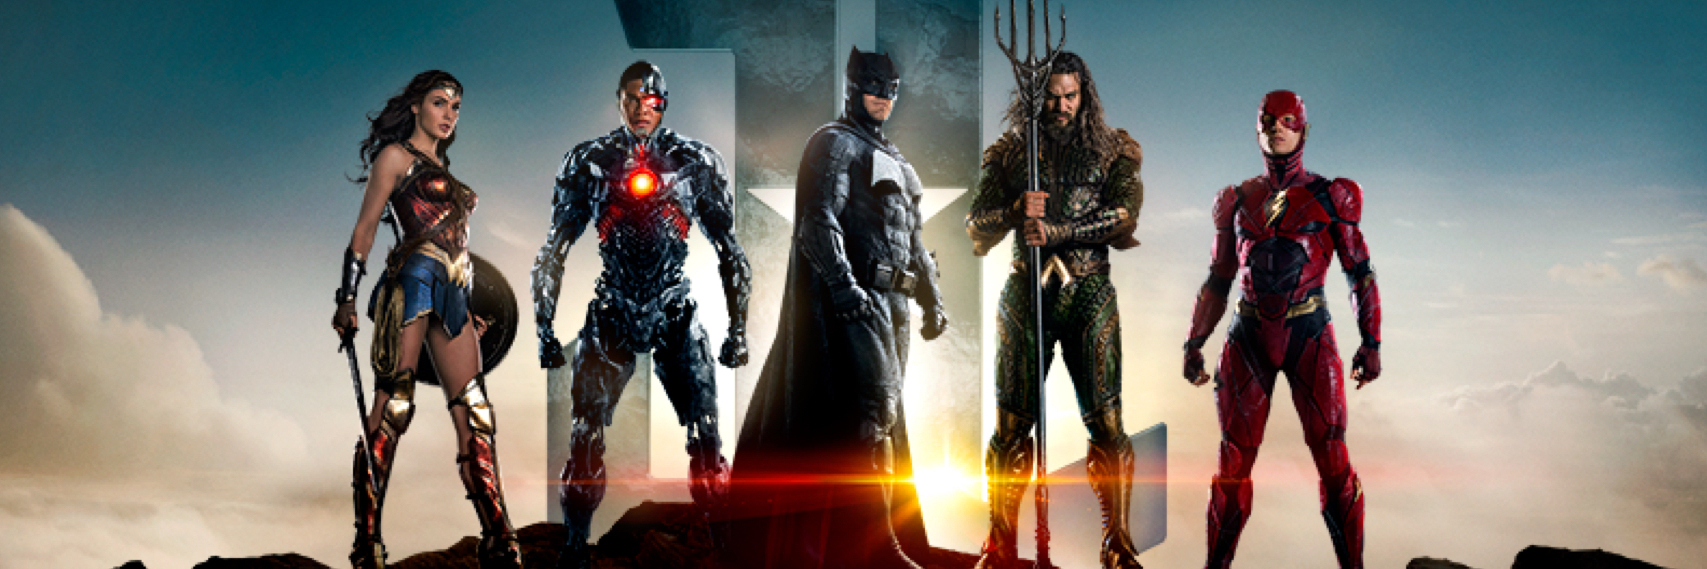 Promotional image of Justice League heroes